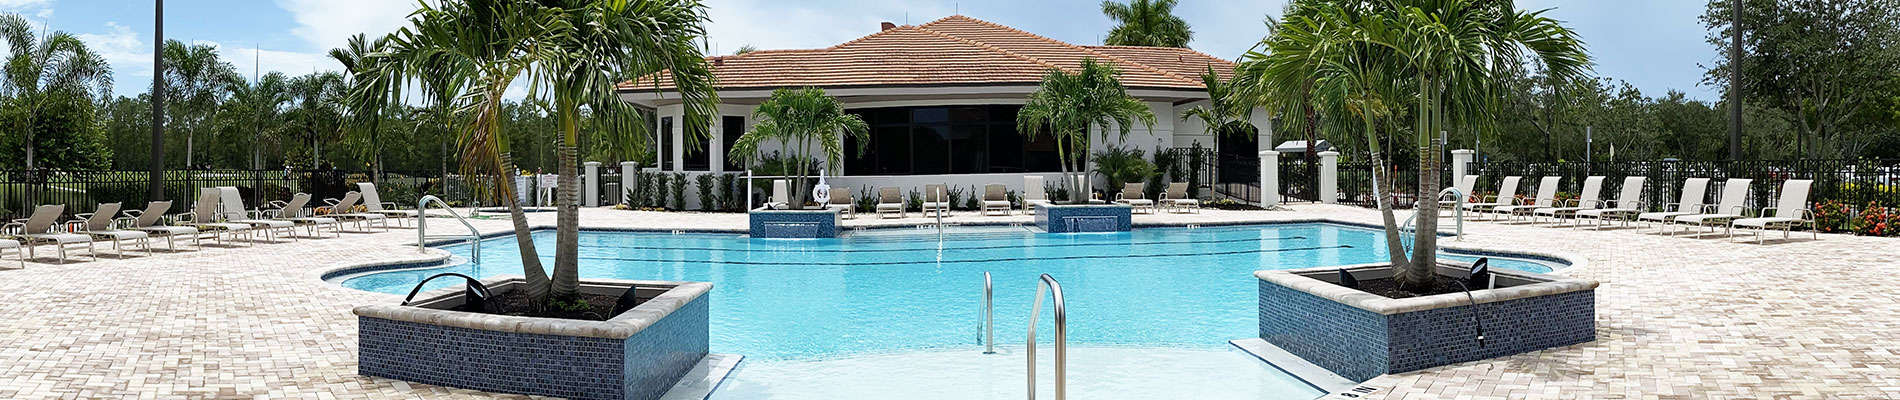 Naples Heritage Golf and Country Club Pool Cabana